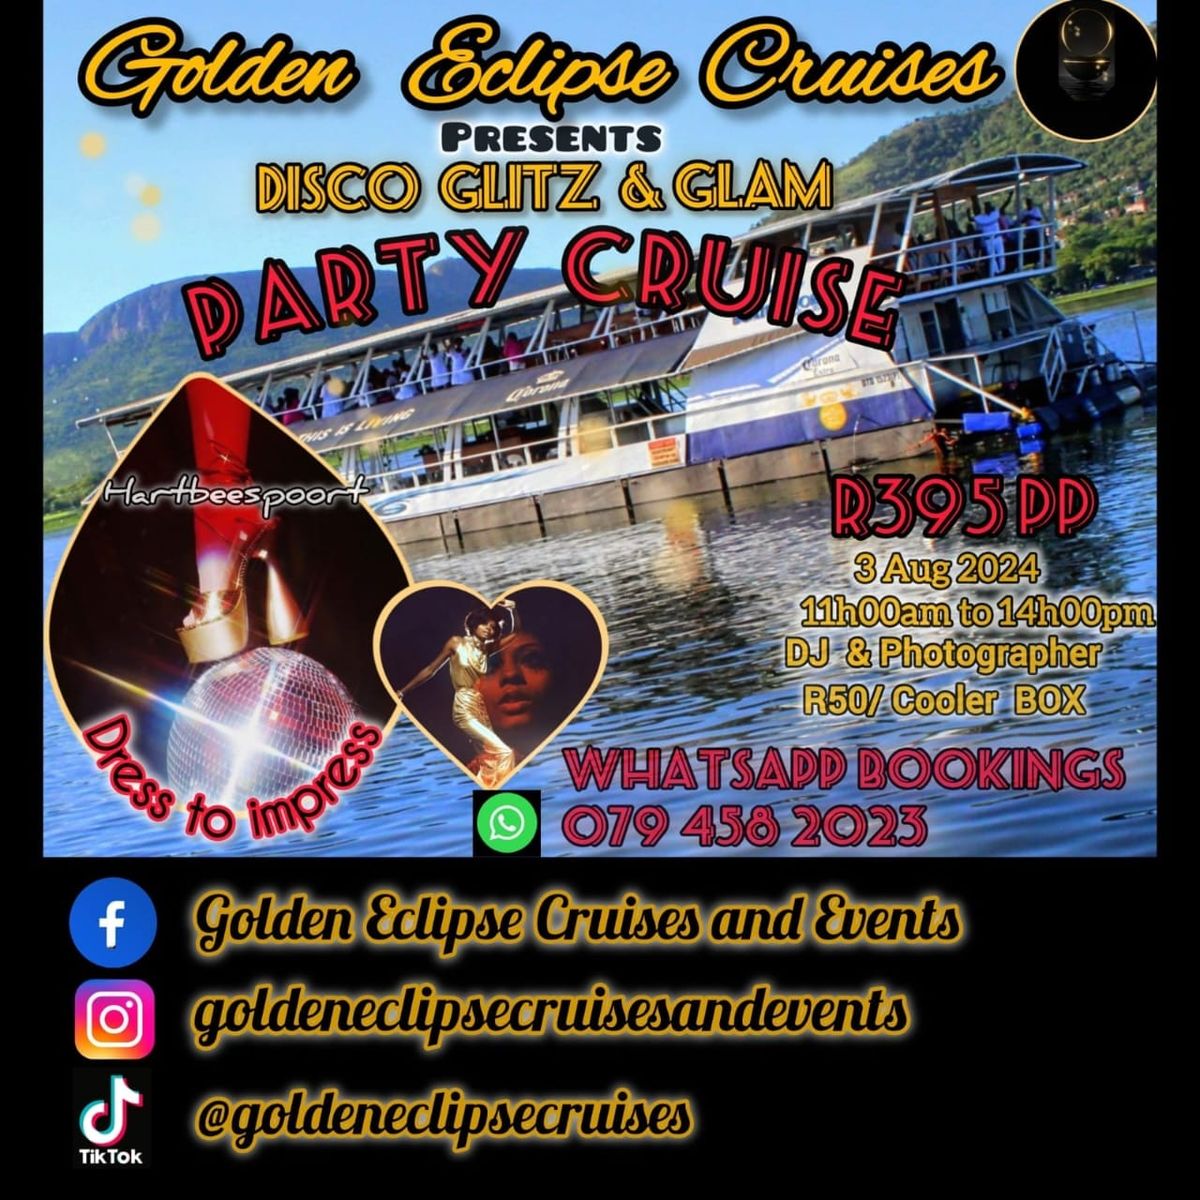 Party Cruise (Disco and Glam)